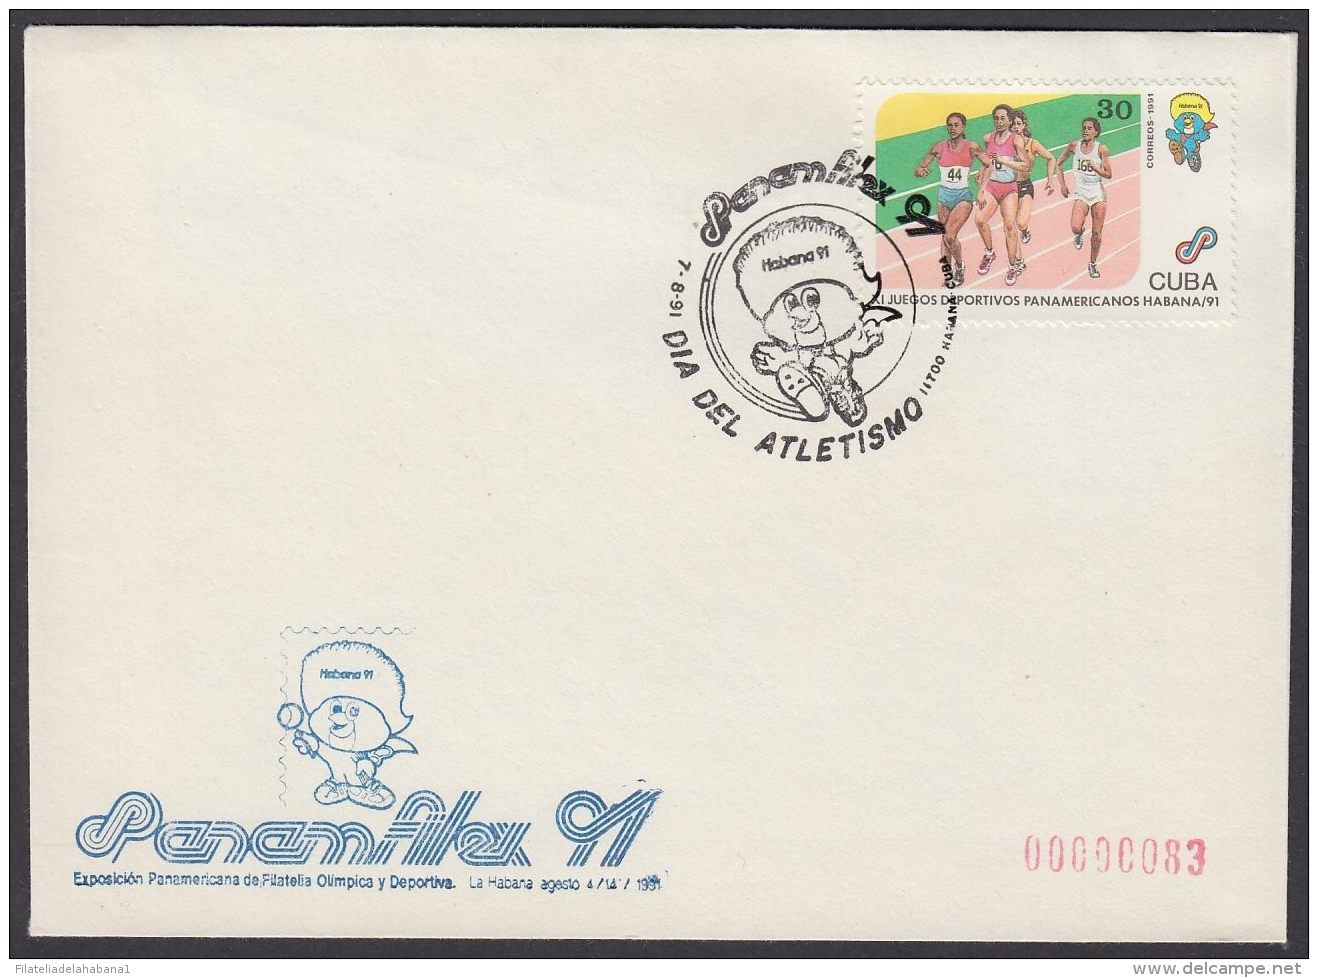 1991-CE-44 CUBA 1991 SPECIAL CANCEL. PANAMFILEX EXPO. DIA DEL ATLETISMO. ATHLETISM - Covers & Documents